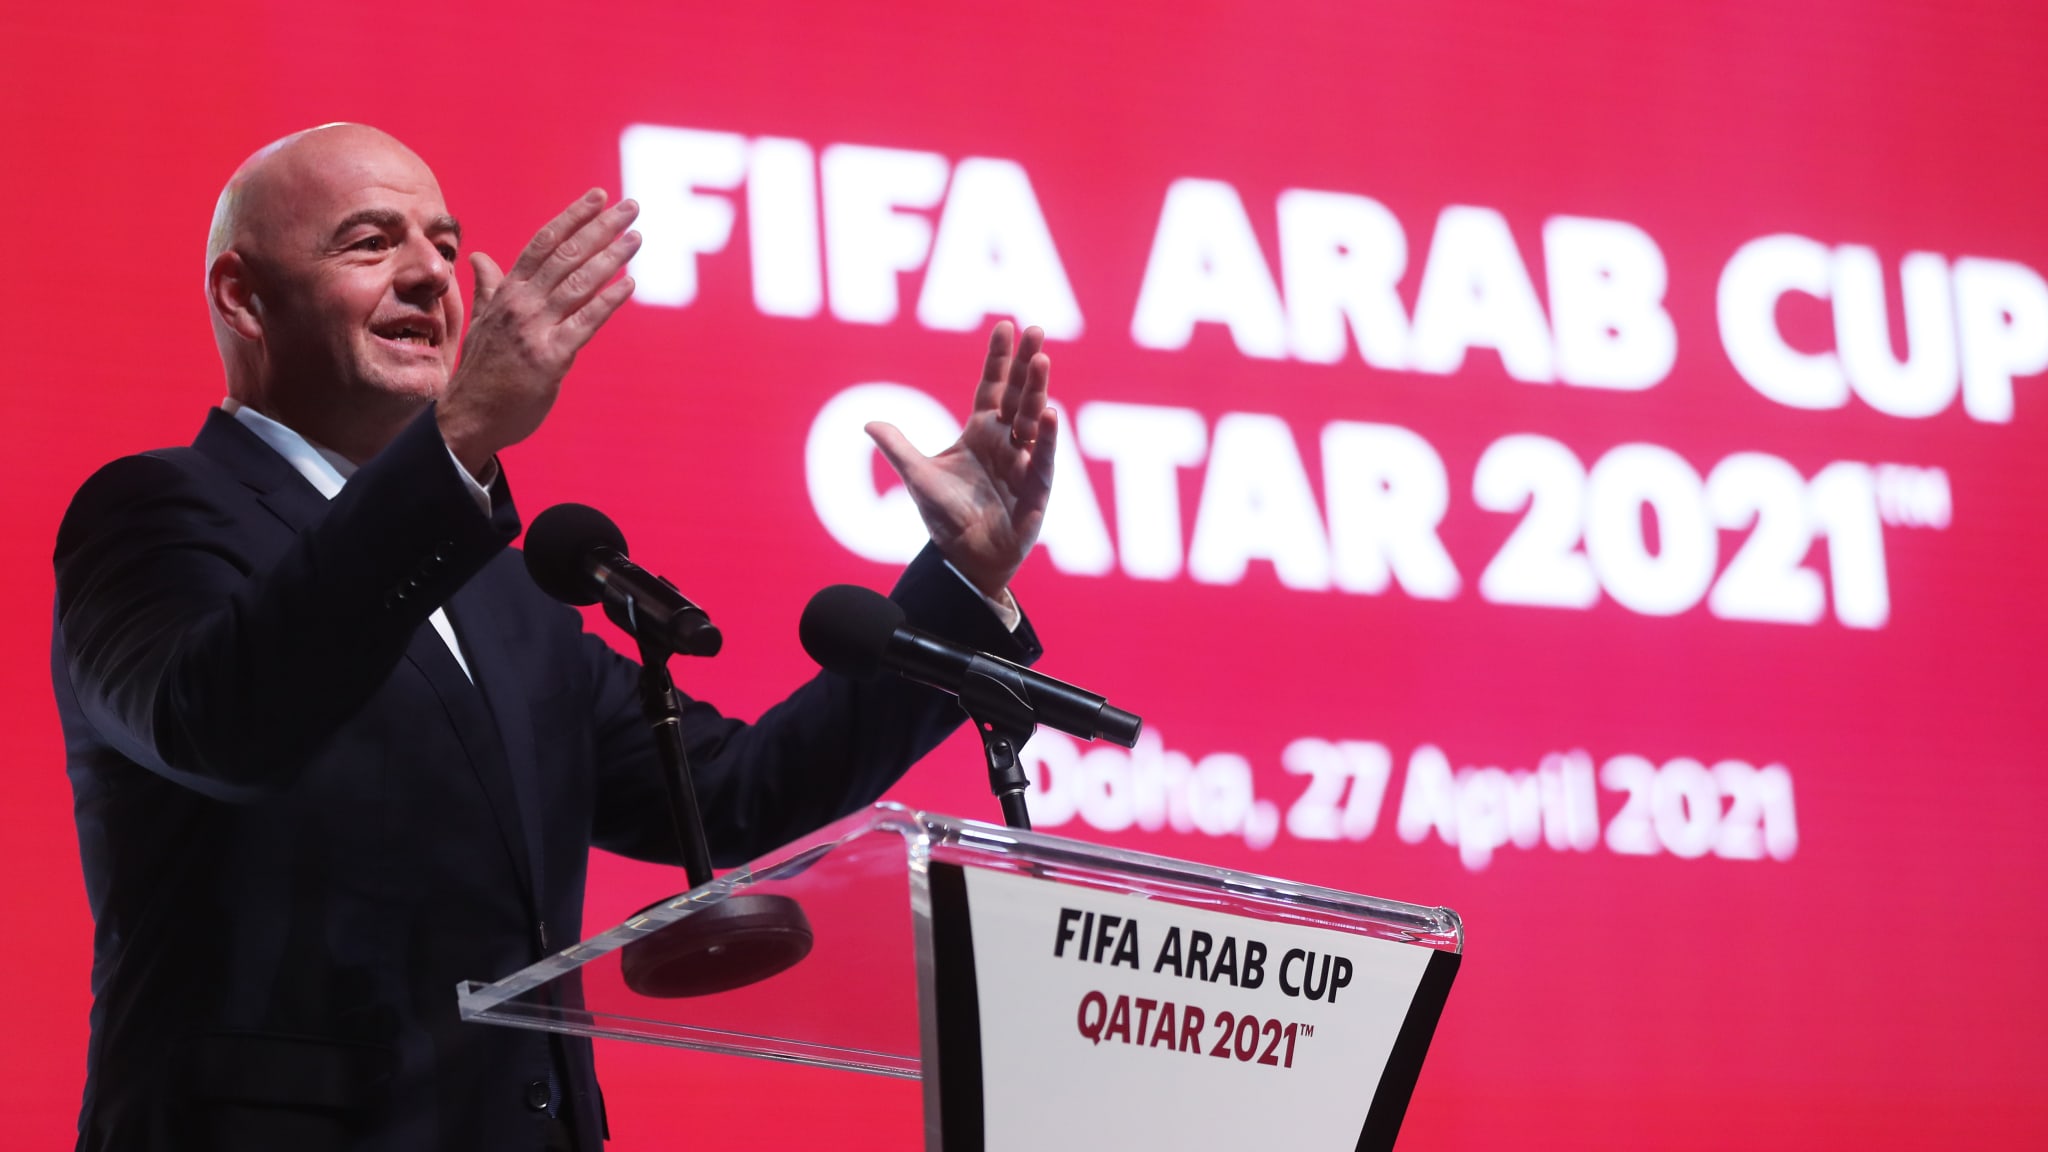 FIFA Arab Cup: the schedule is known

